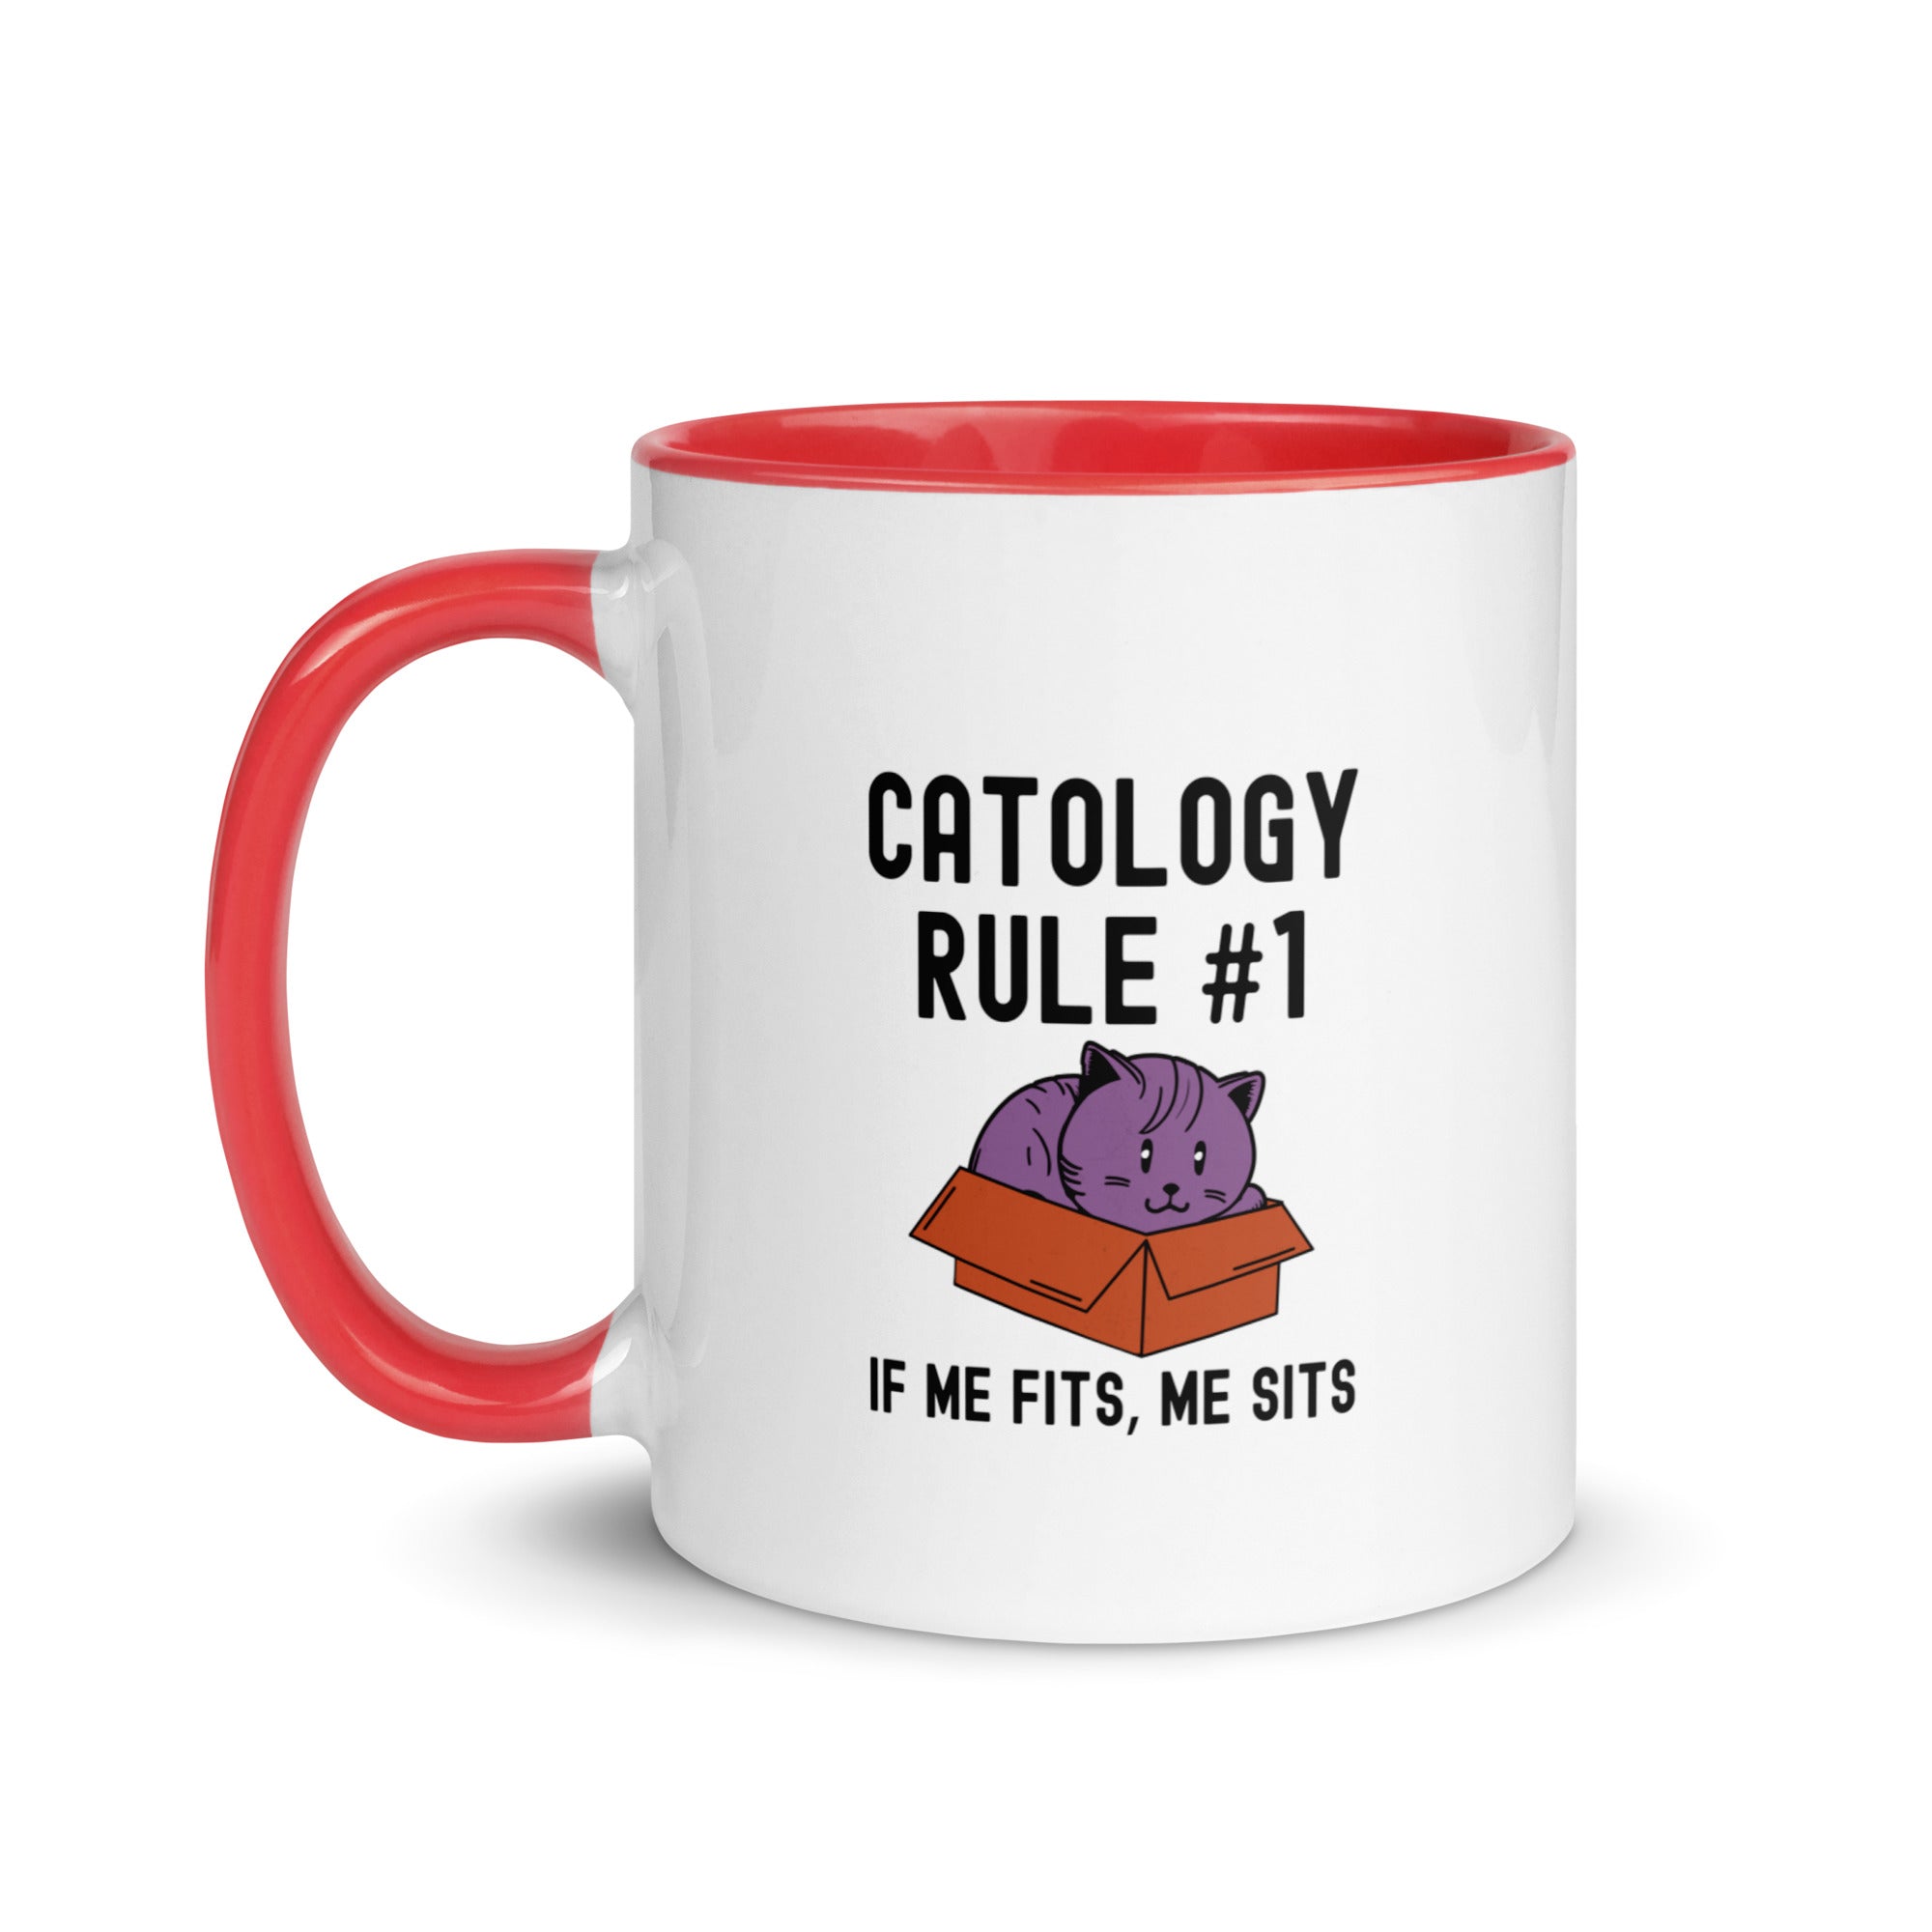 Mug with Color Inside | Catology Rule #1 If me fits, me sits